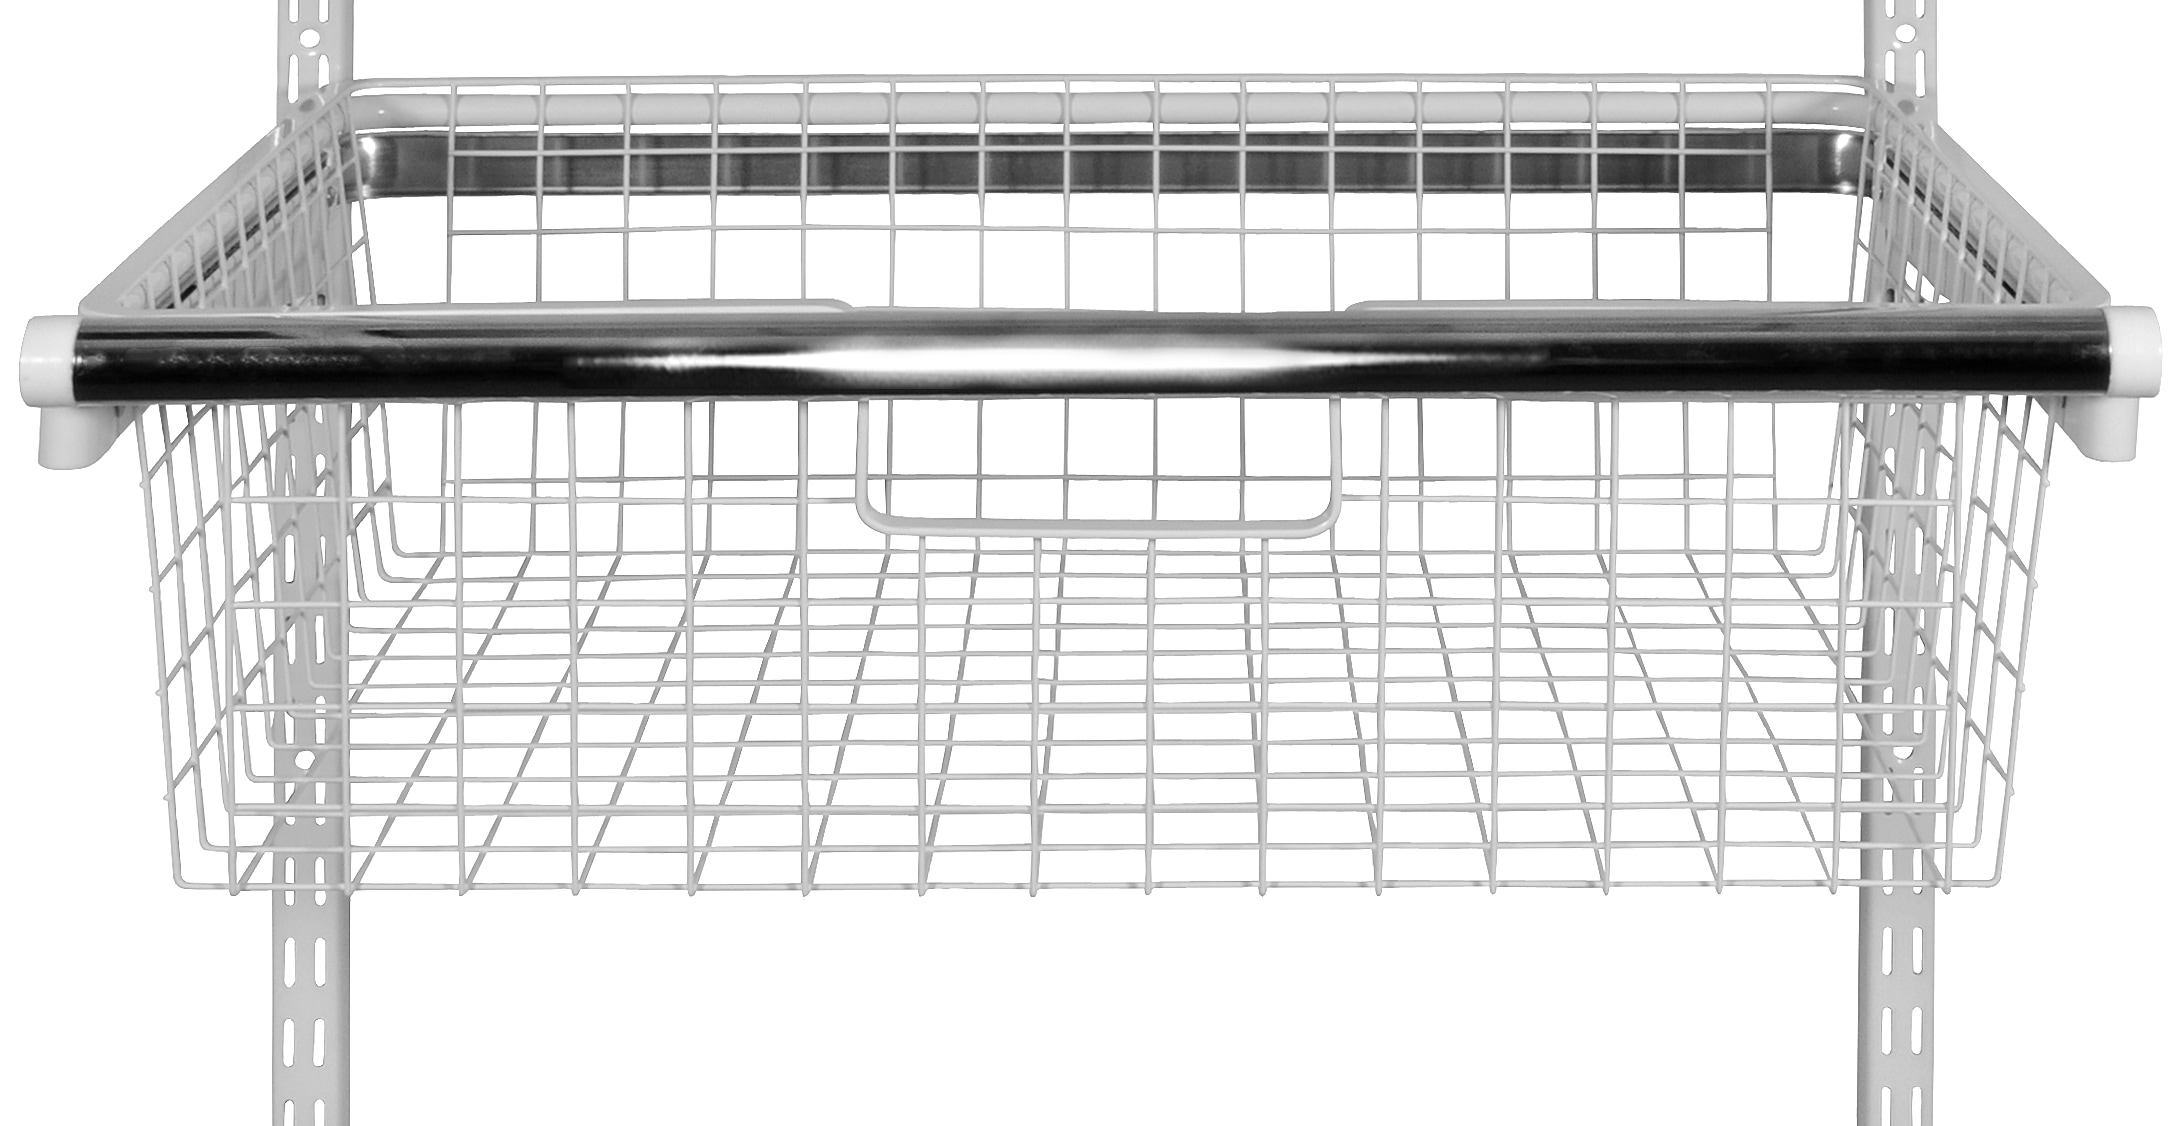 Rubbermaid HomeFree 2-ft x 12-in White Adjustable Wire Shelf at